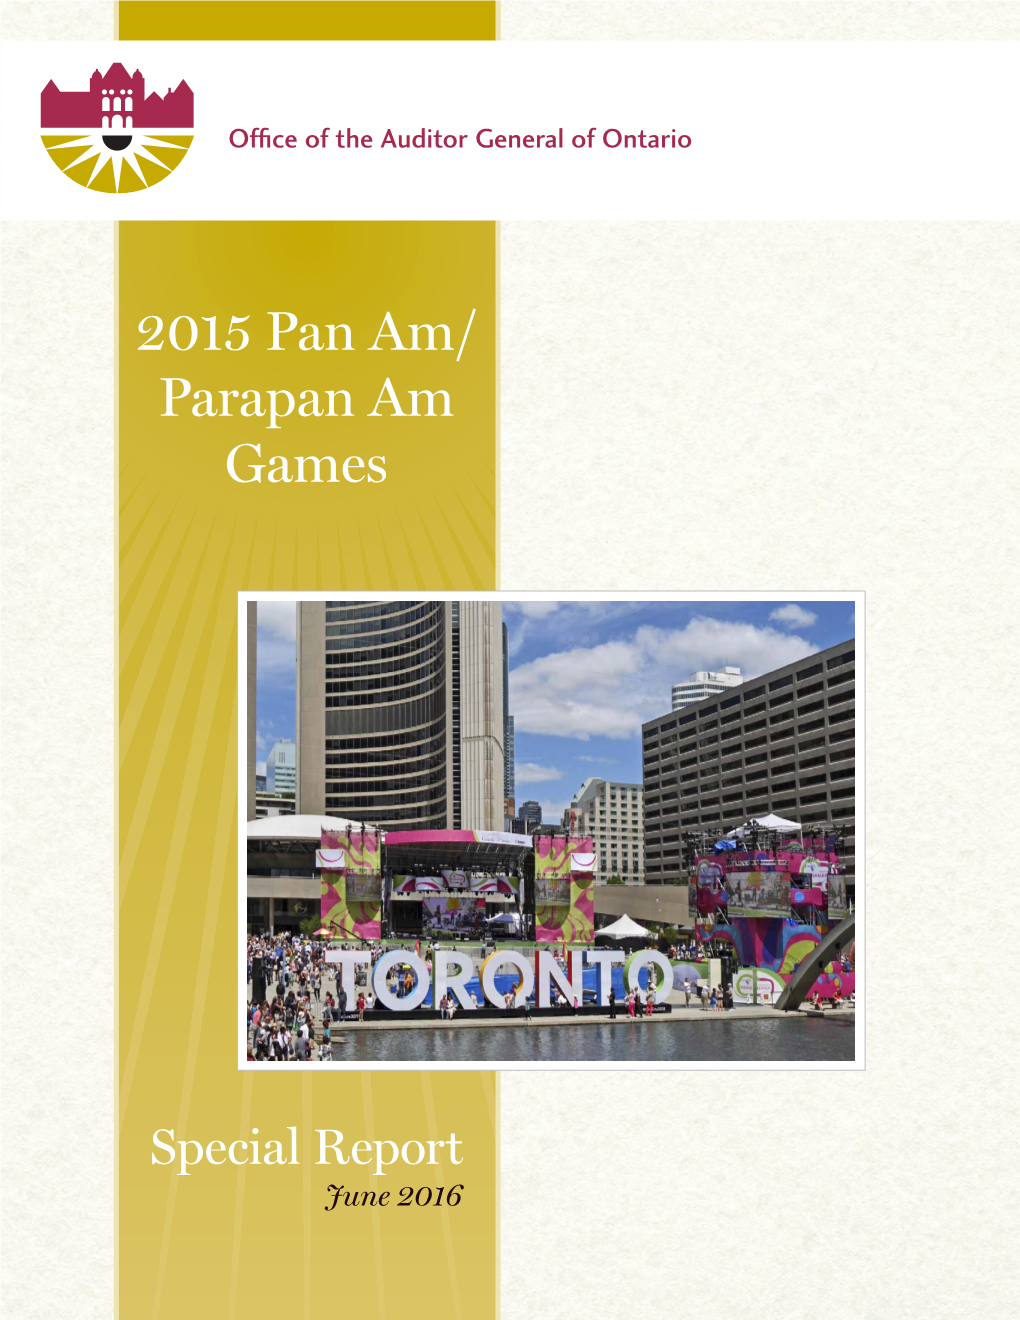 2015 Pan Am/Parapan Am Games, As Requested by the Standing Committee on Public Accounts Under Section 17 of the Auditor General Act